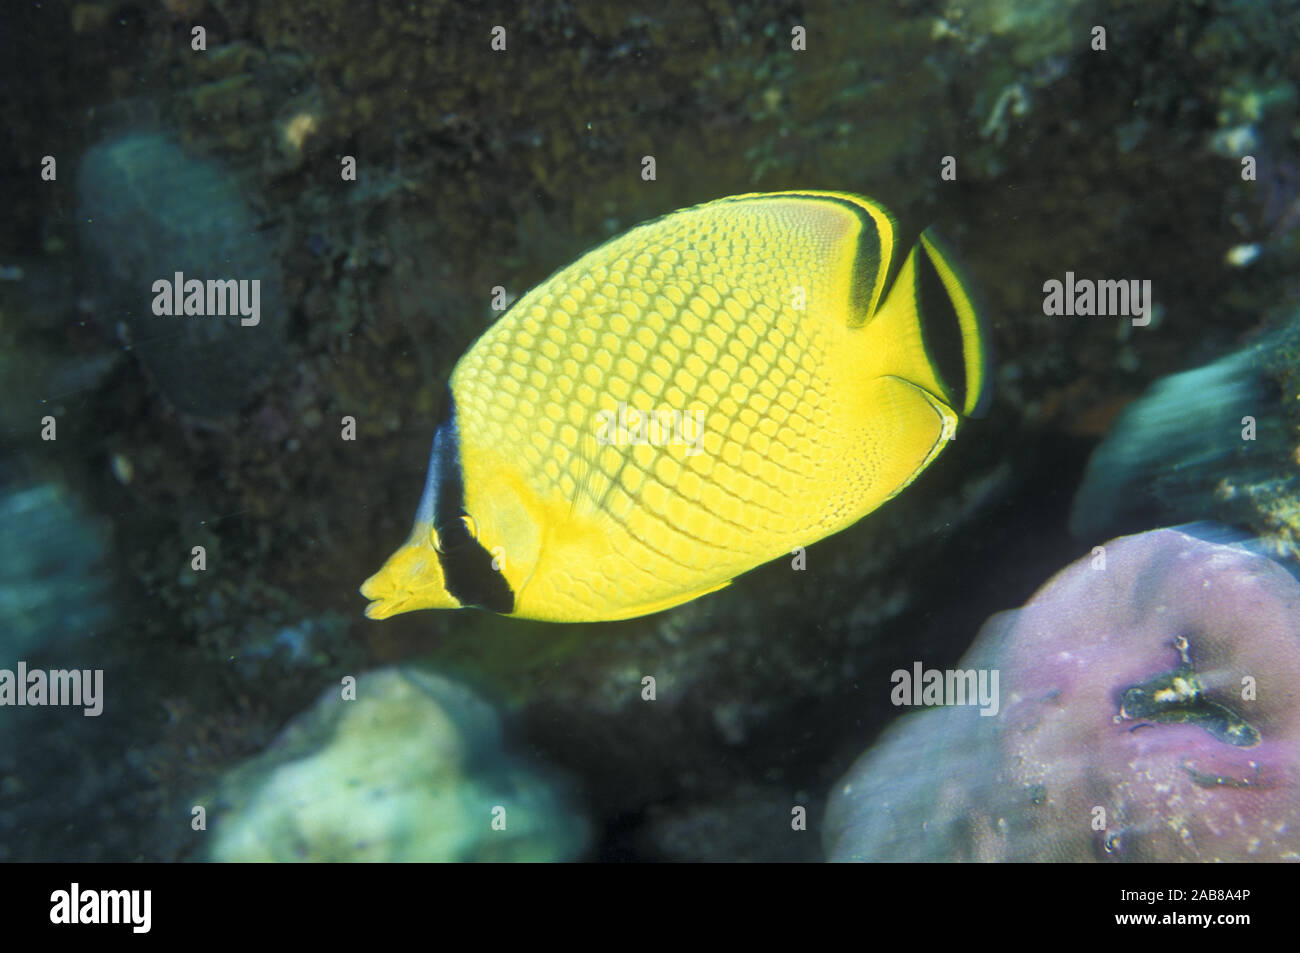 Latticed butterflyfish (Chaetodon rafflesii), Like most butterflyfish, it is prized as an aquarium fish. Not common on the Great Barrier Reef. Bali, I Stock Photo